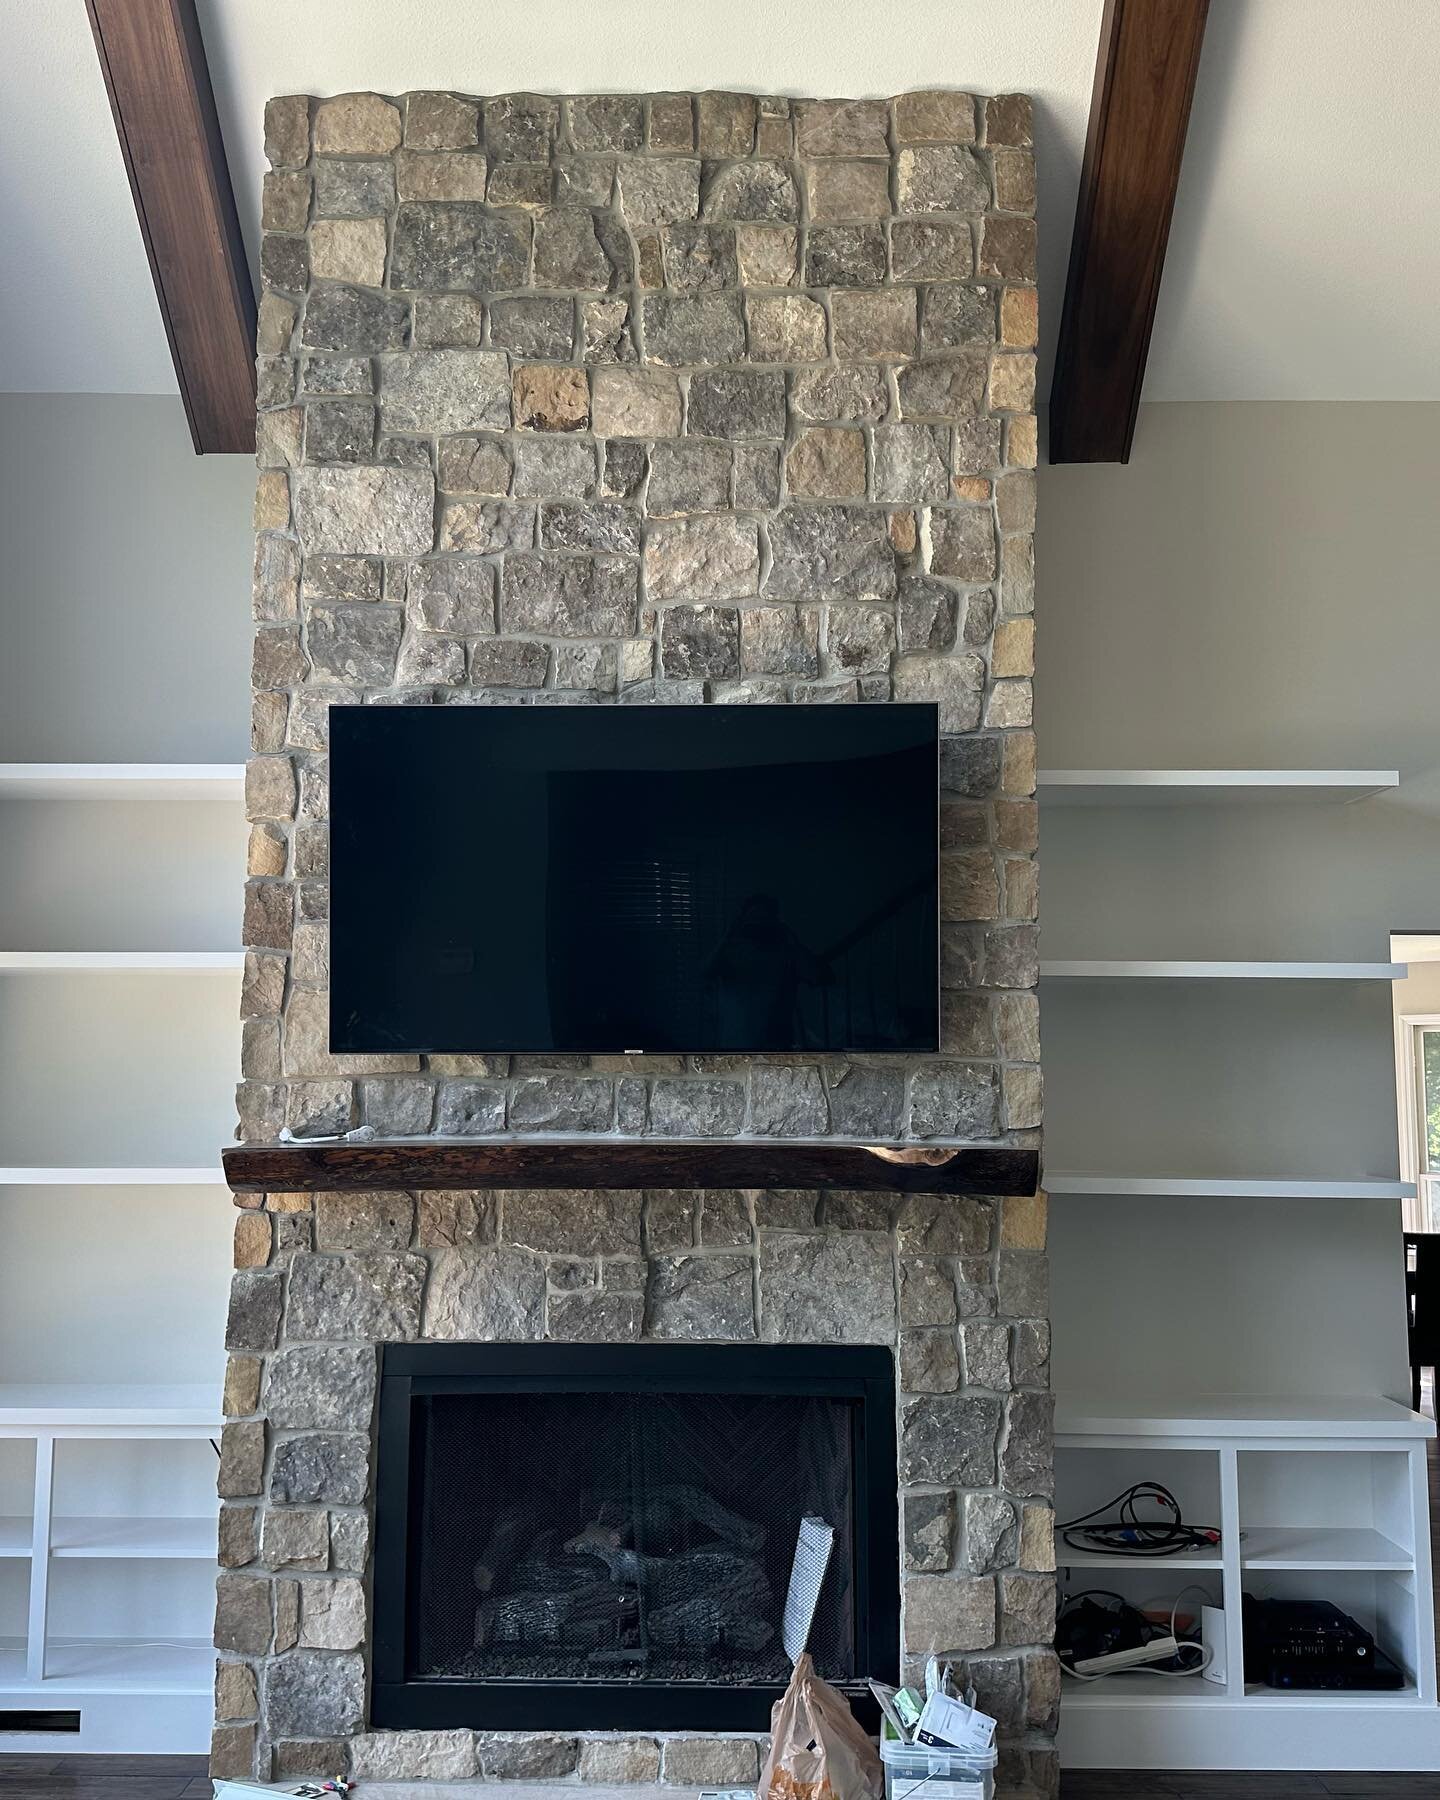 Amazing living room completed! Stained the newly installed beams and painted the ceiling, trim and walls of course. Btw, that gorgeous stone fireplace wasn&rsquo;t there when the project began. Amazing addition!